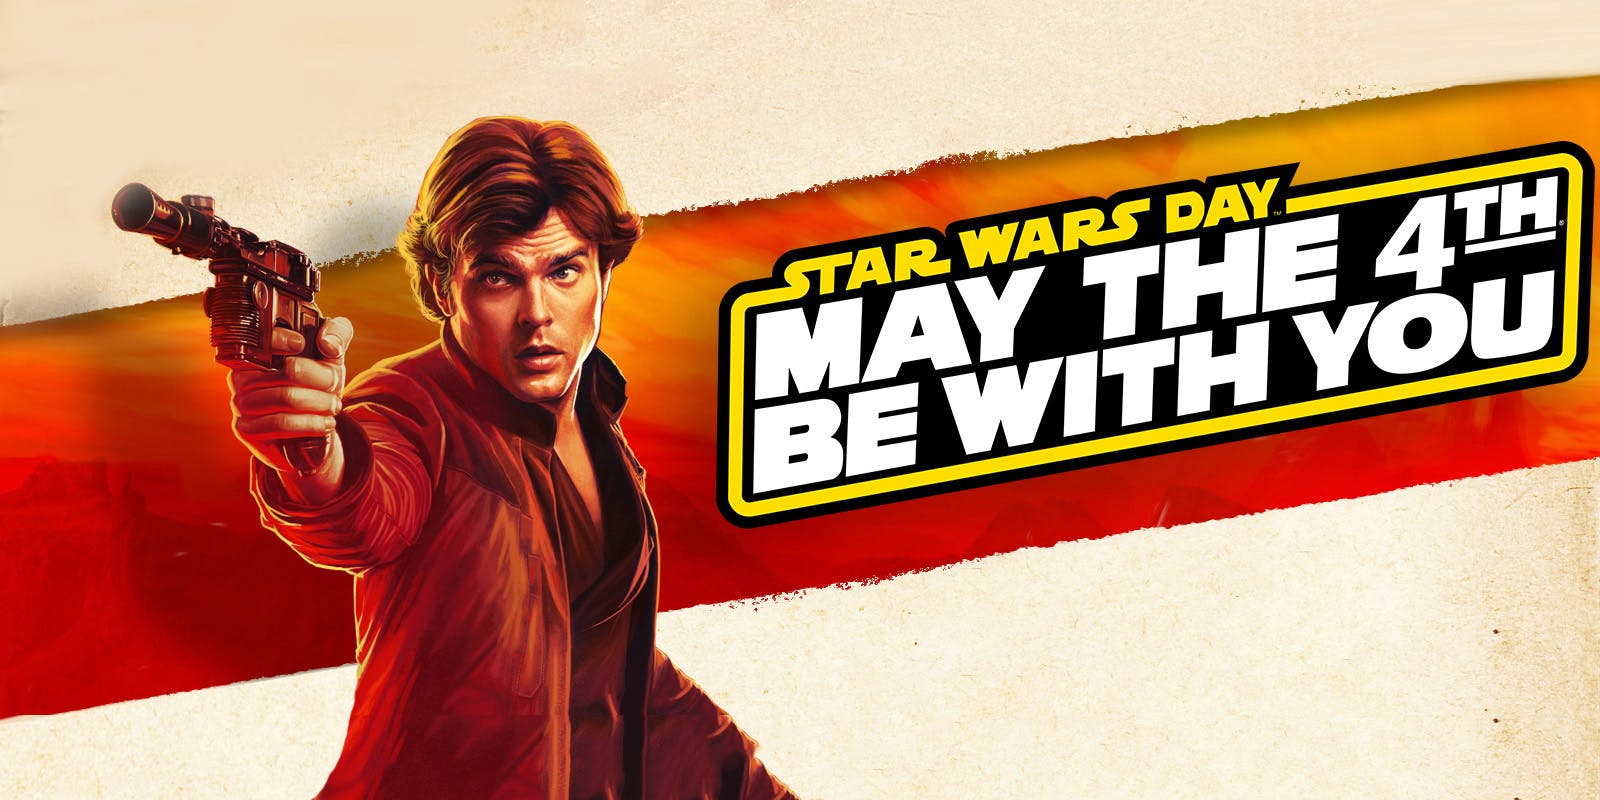 Top ten ways to celebrate May the 4th